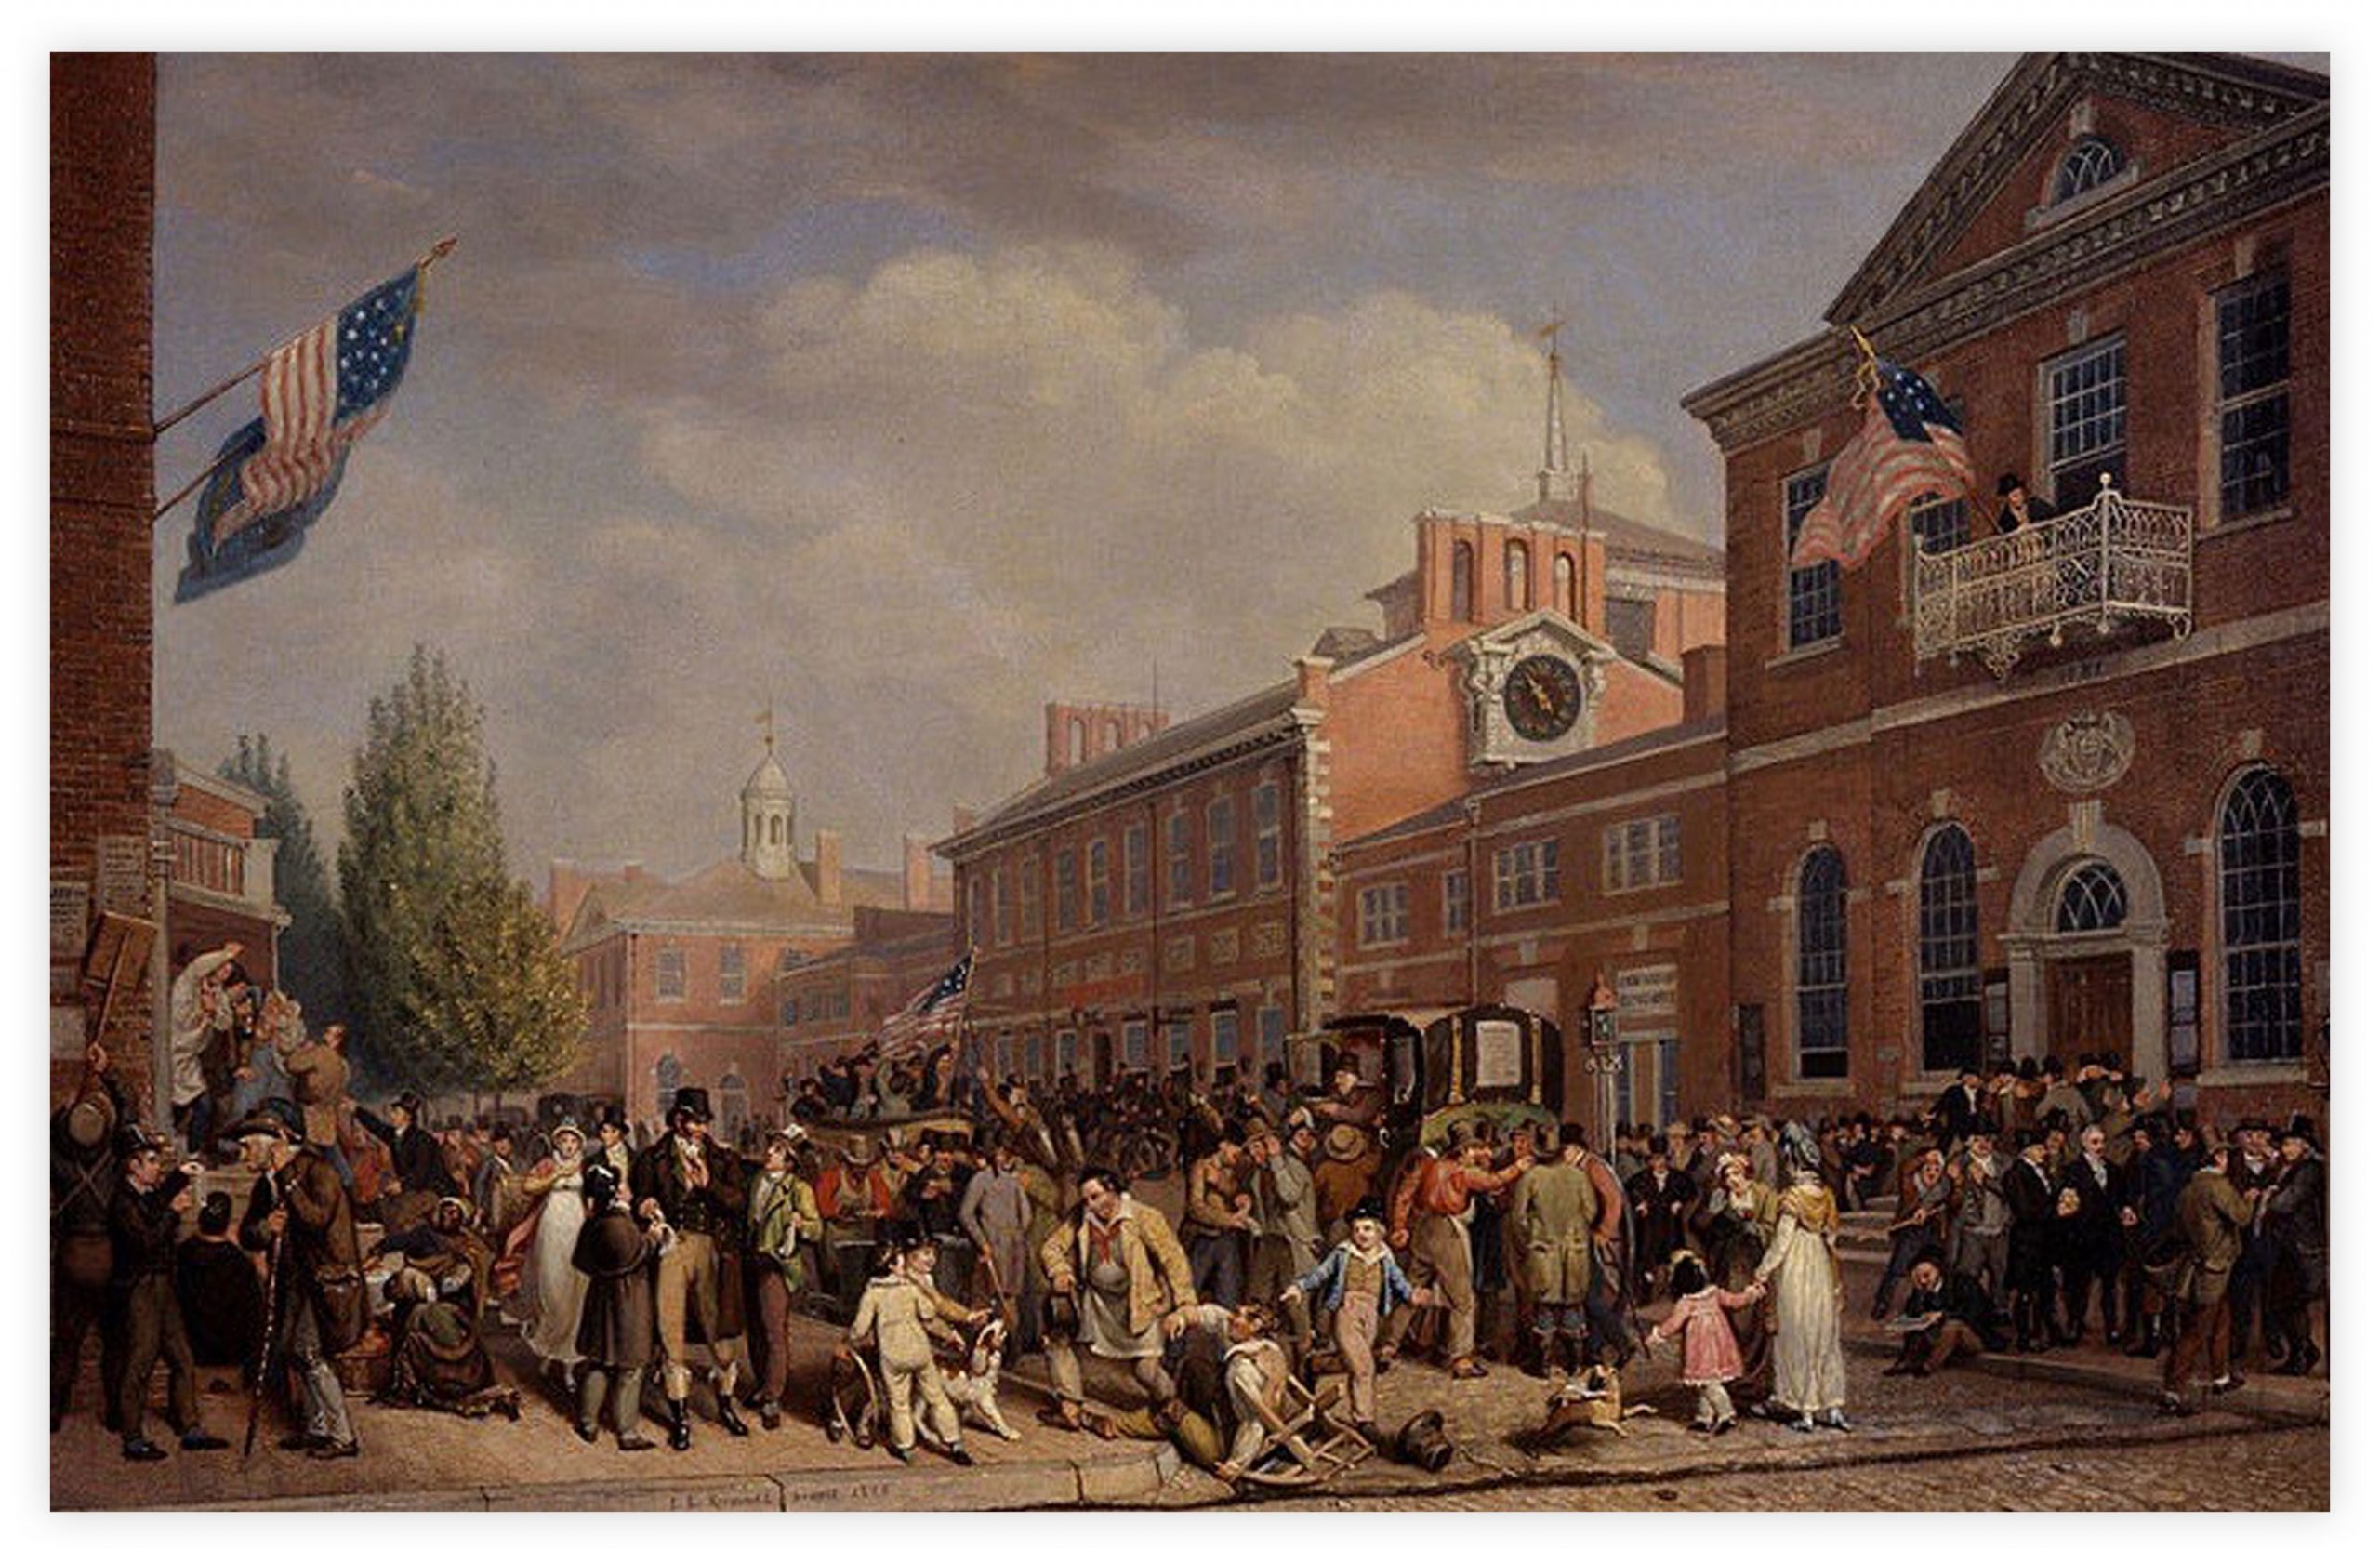 Election at the State House (c. 1815) by John Lewis Krimmel (The Historical Society of Pennsylvania). This is one of only a few contemporary images of an election scene from the early American republic. Set in Philadelphia in 1815, the image shows a wide range of people, including women, children, and lower-class white men, engaged a variety of activities in front of the State House. The election has an almost carnivalesque atmosphere, typical for elections at the time.